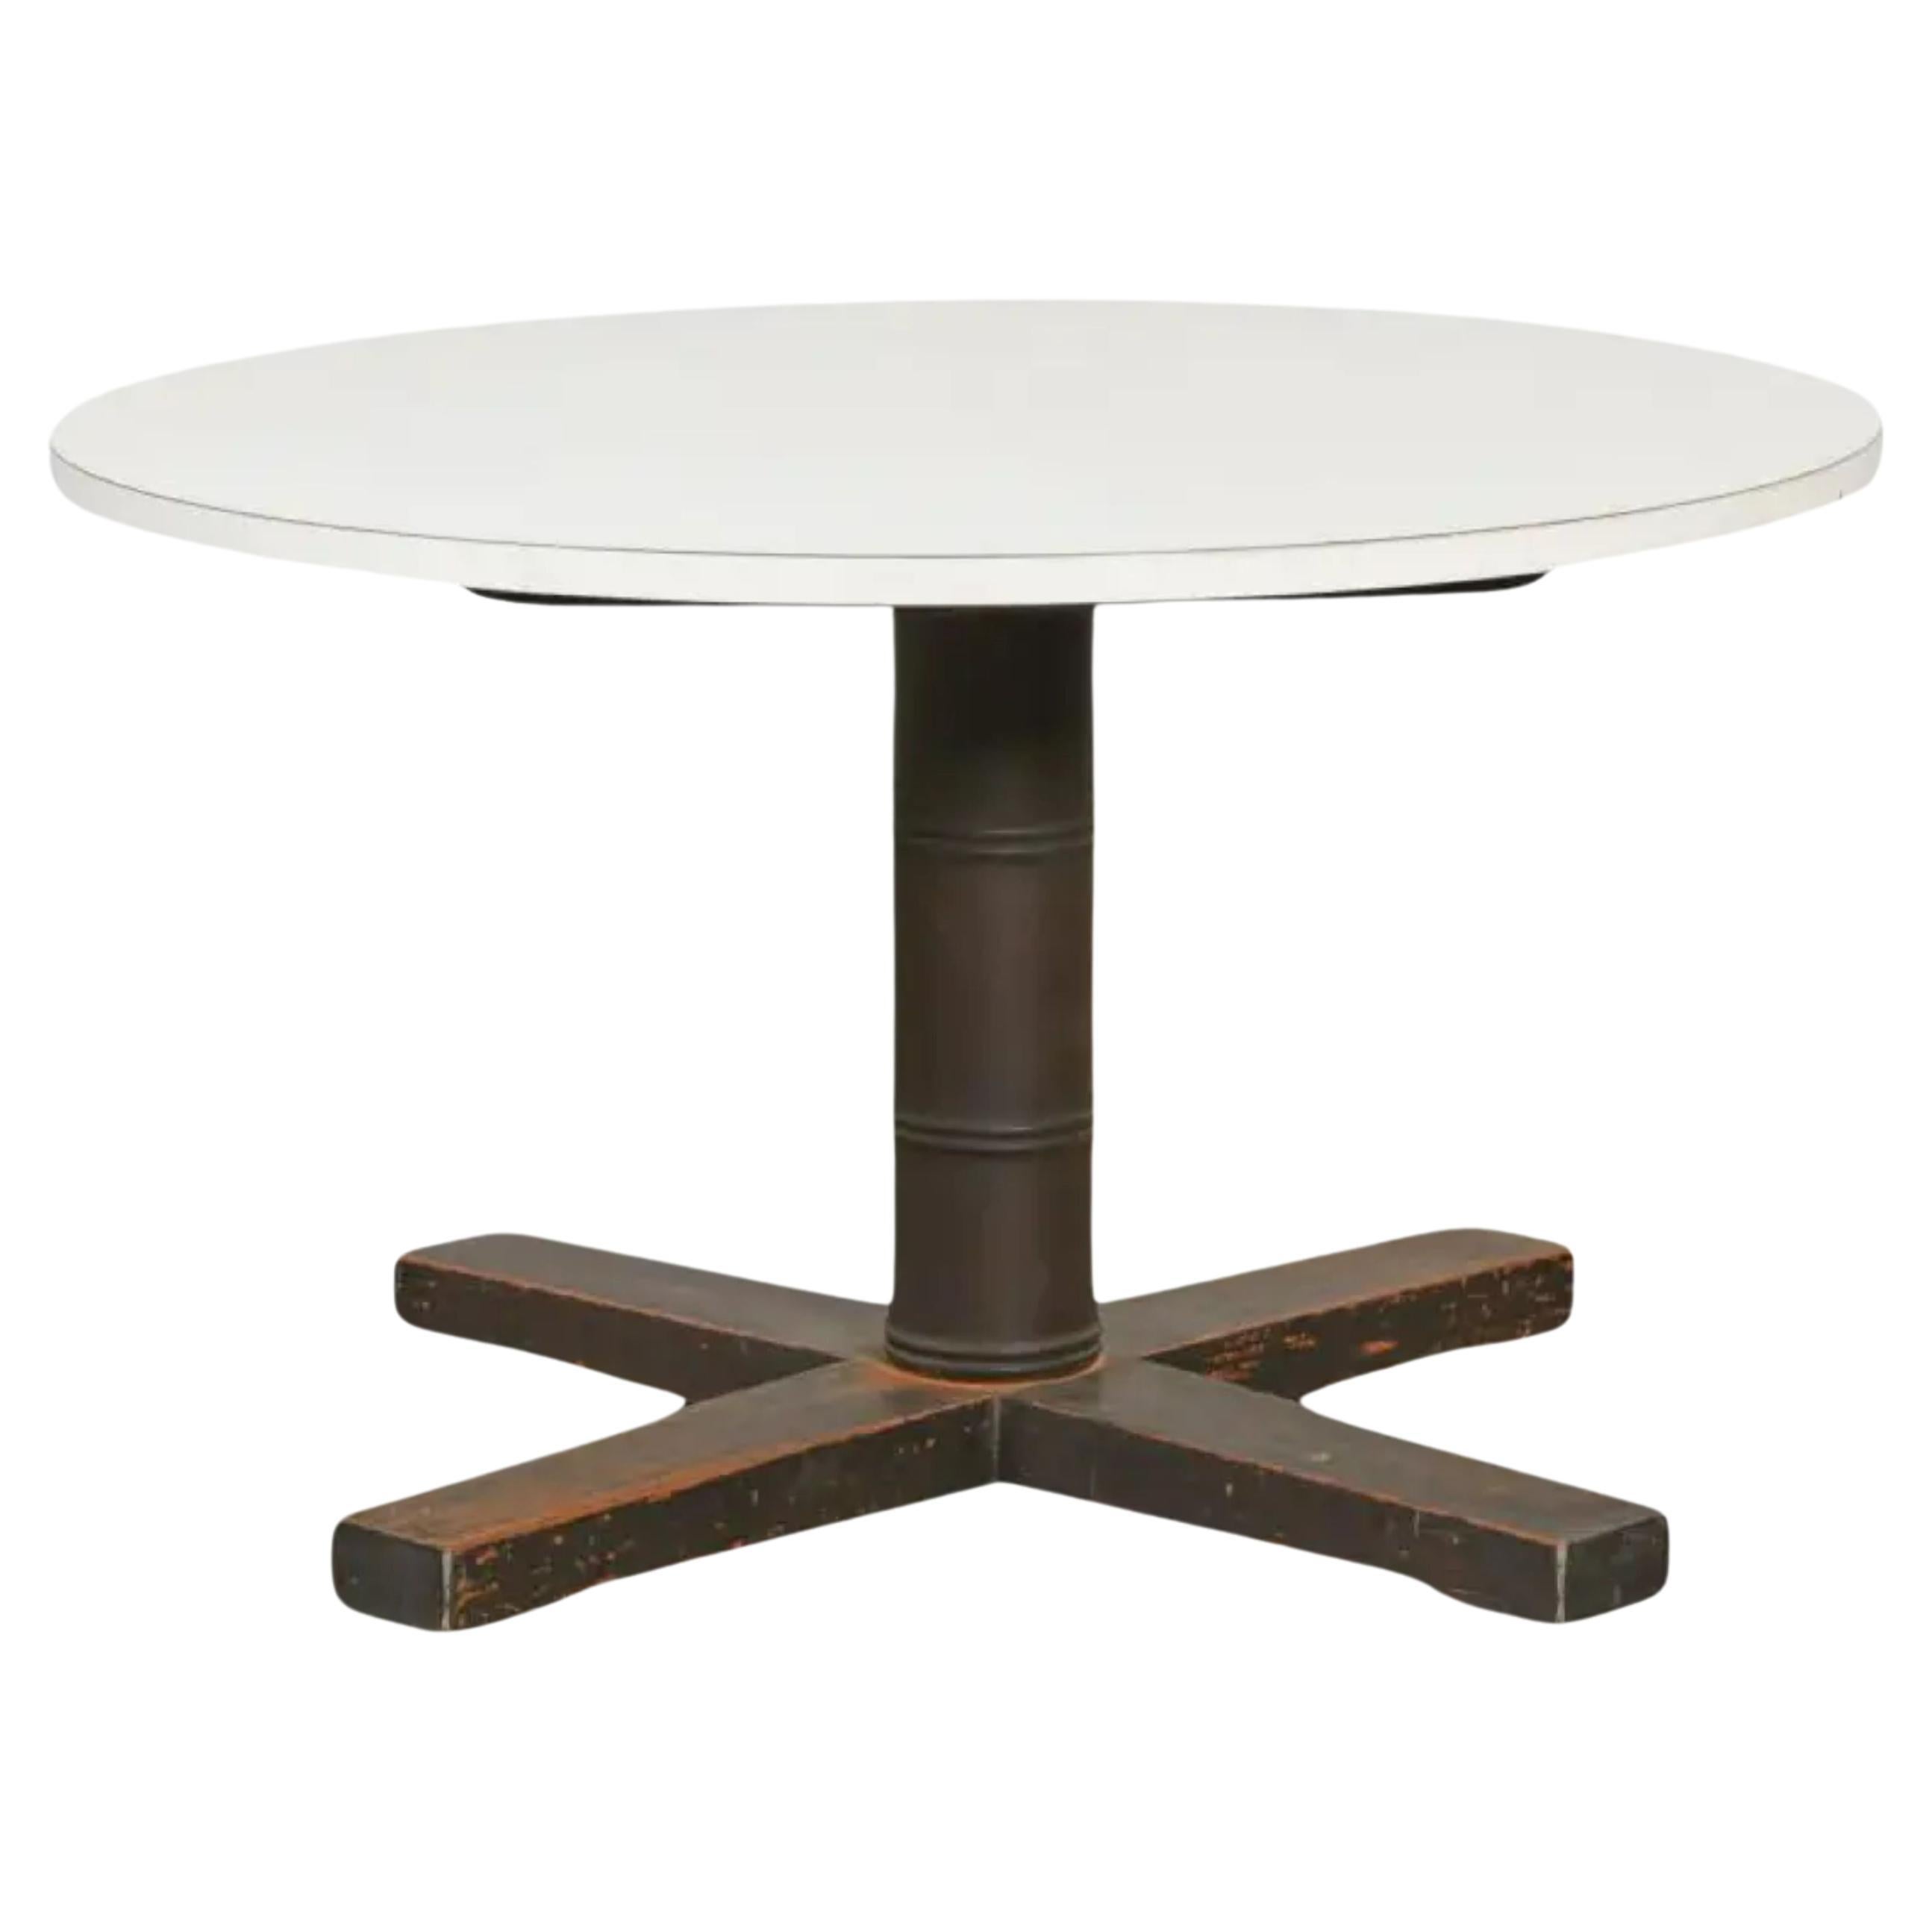 McGuire Furniture Company Pedestal Table, 2010s For Sale